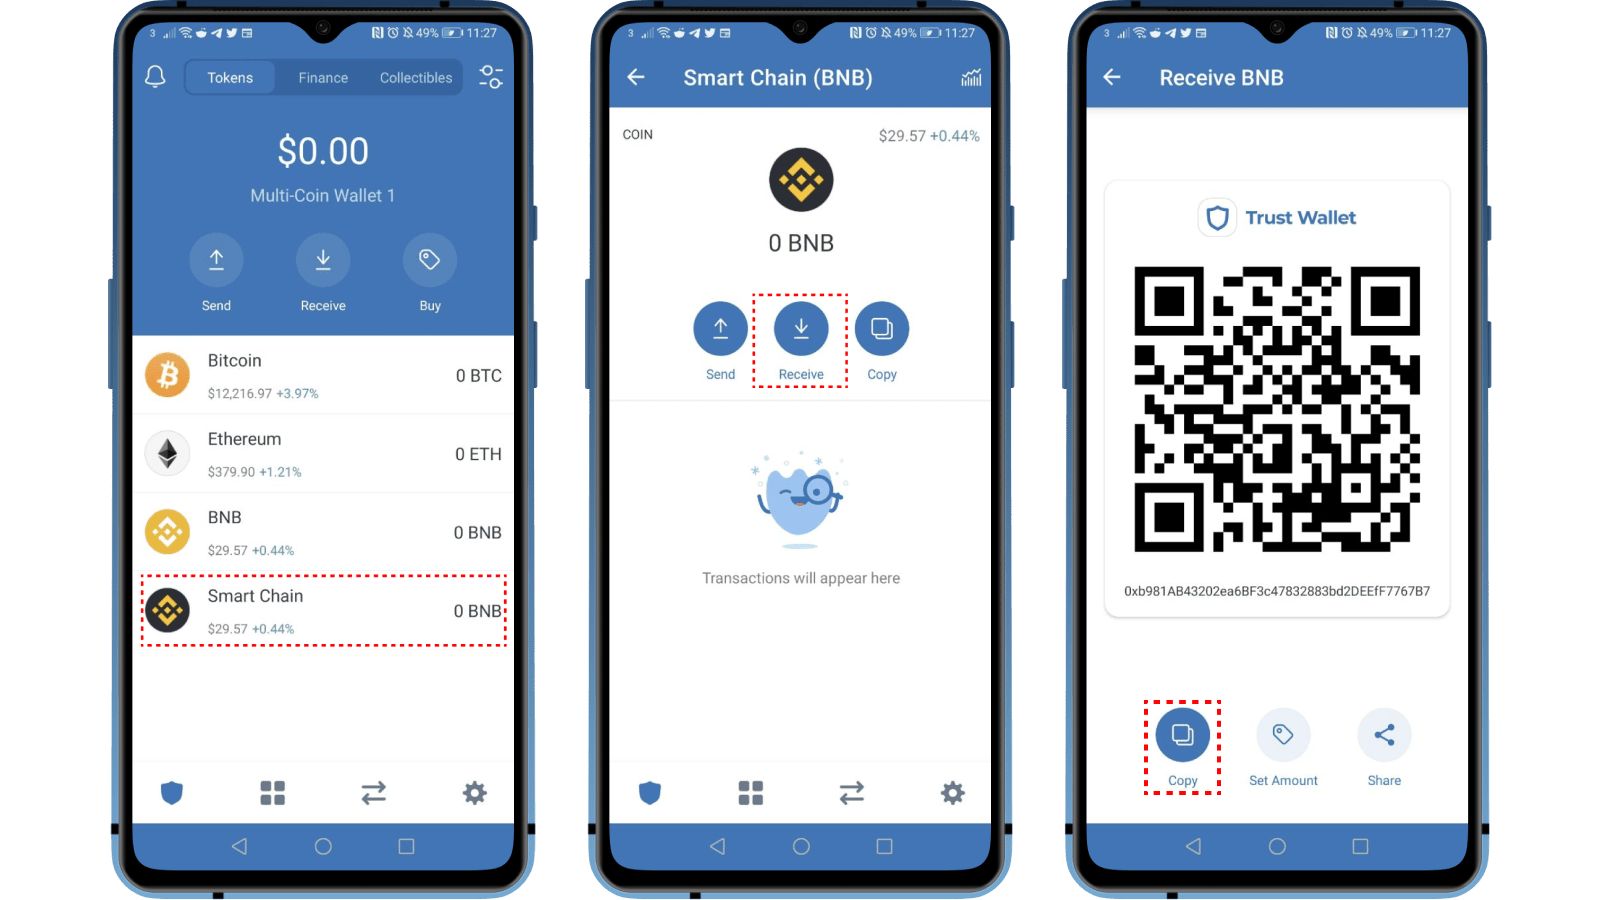 How to See BSC Address in Trust Wallet?